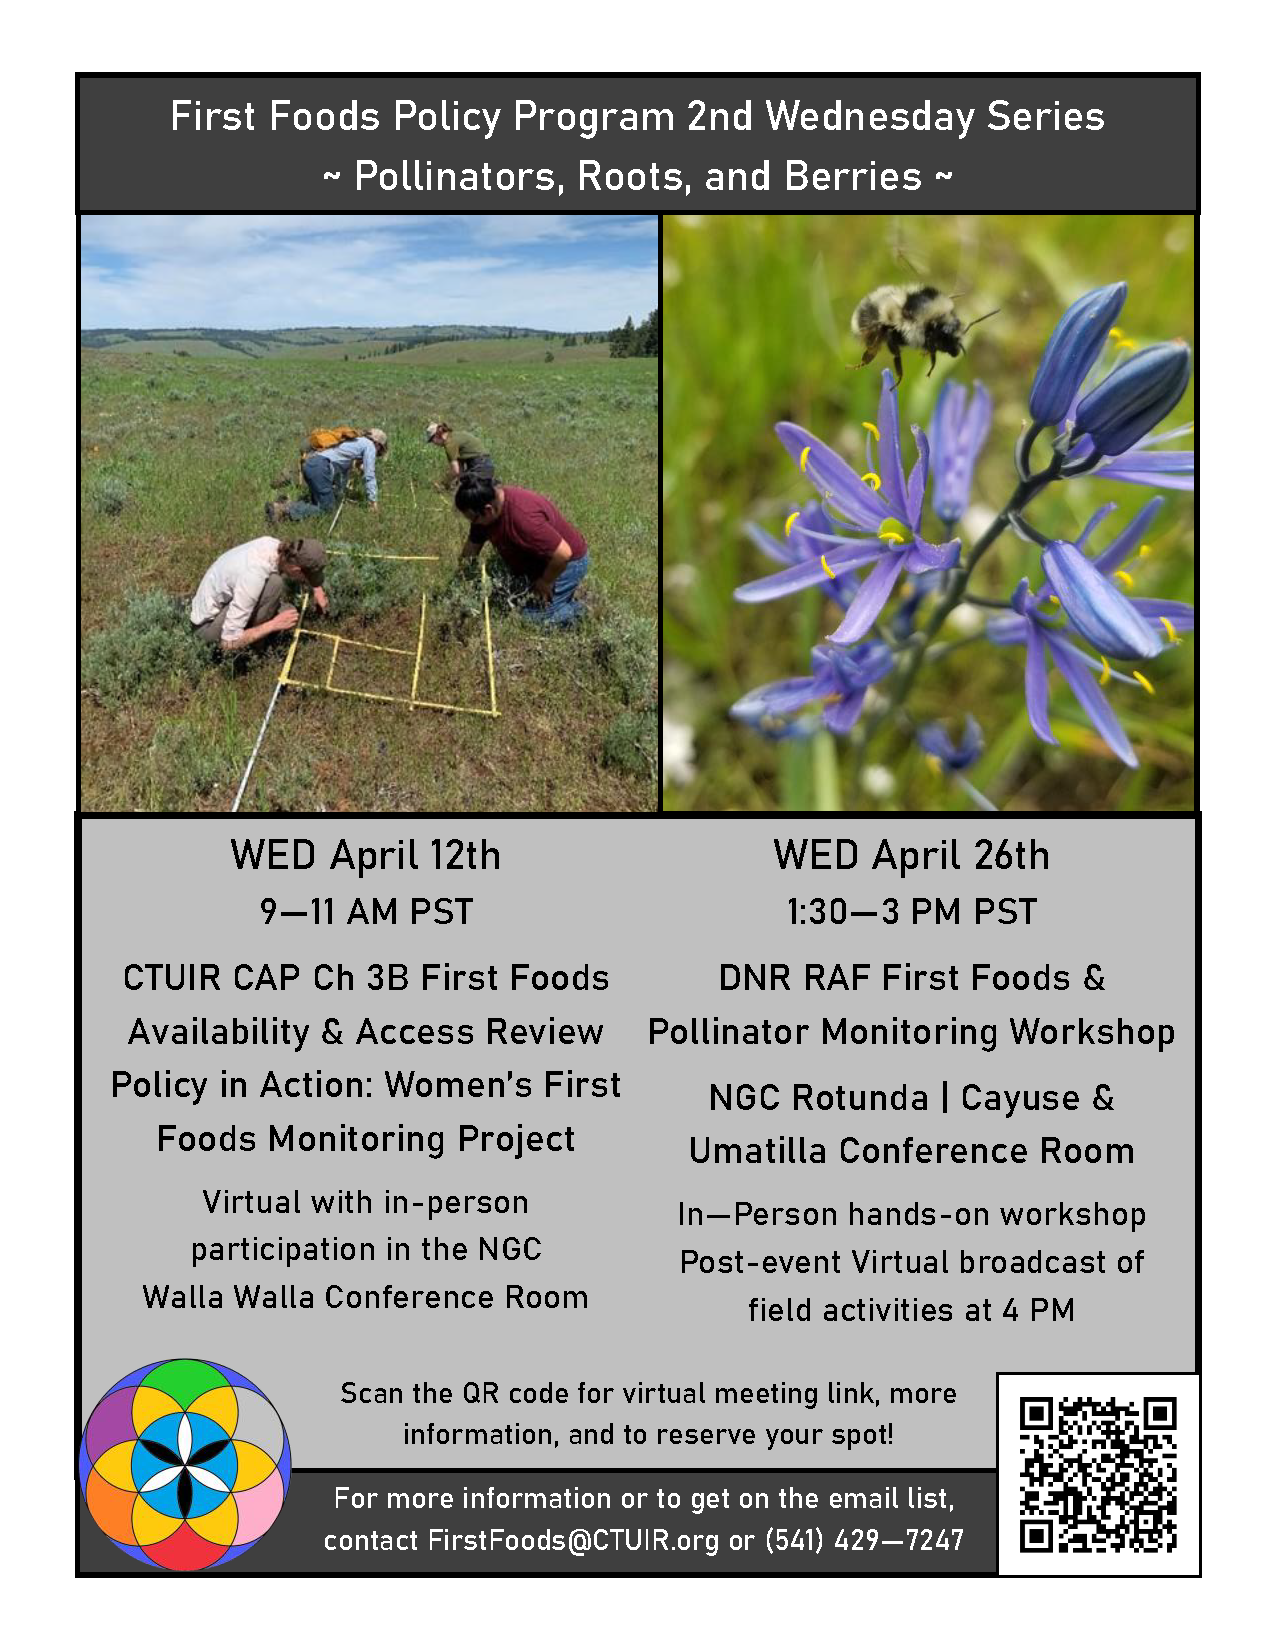 a flyer for an in person and virtual event on April 26 to learn about First Foods monitoring and pollinators